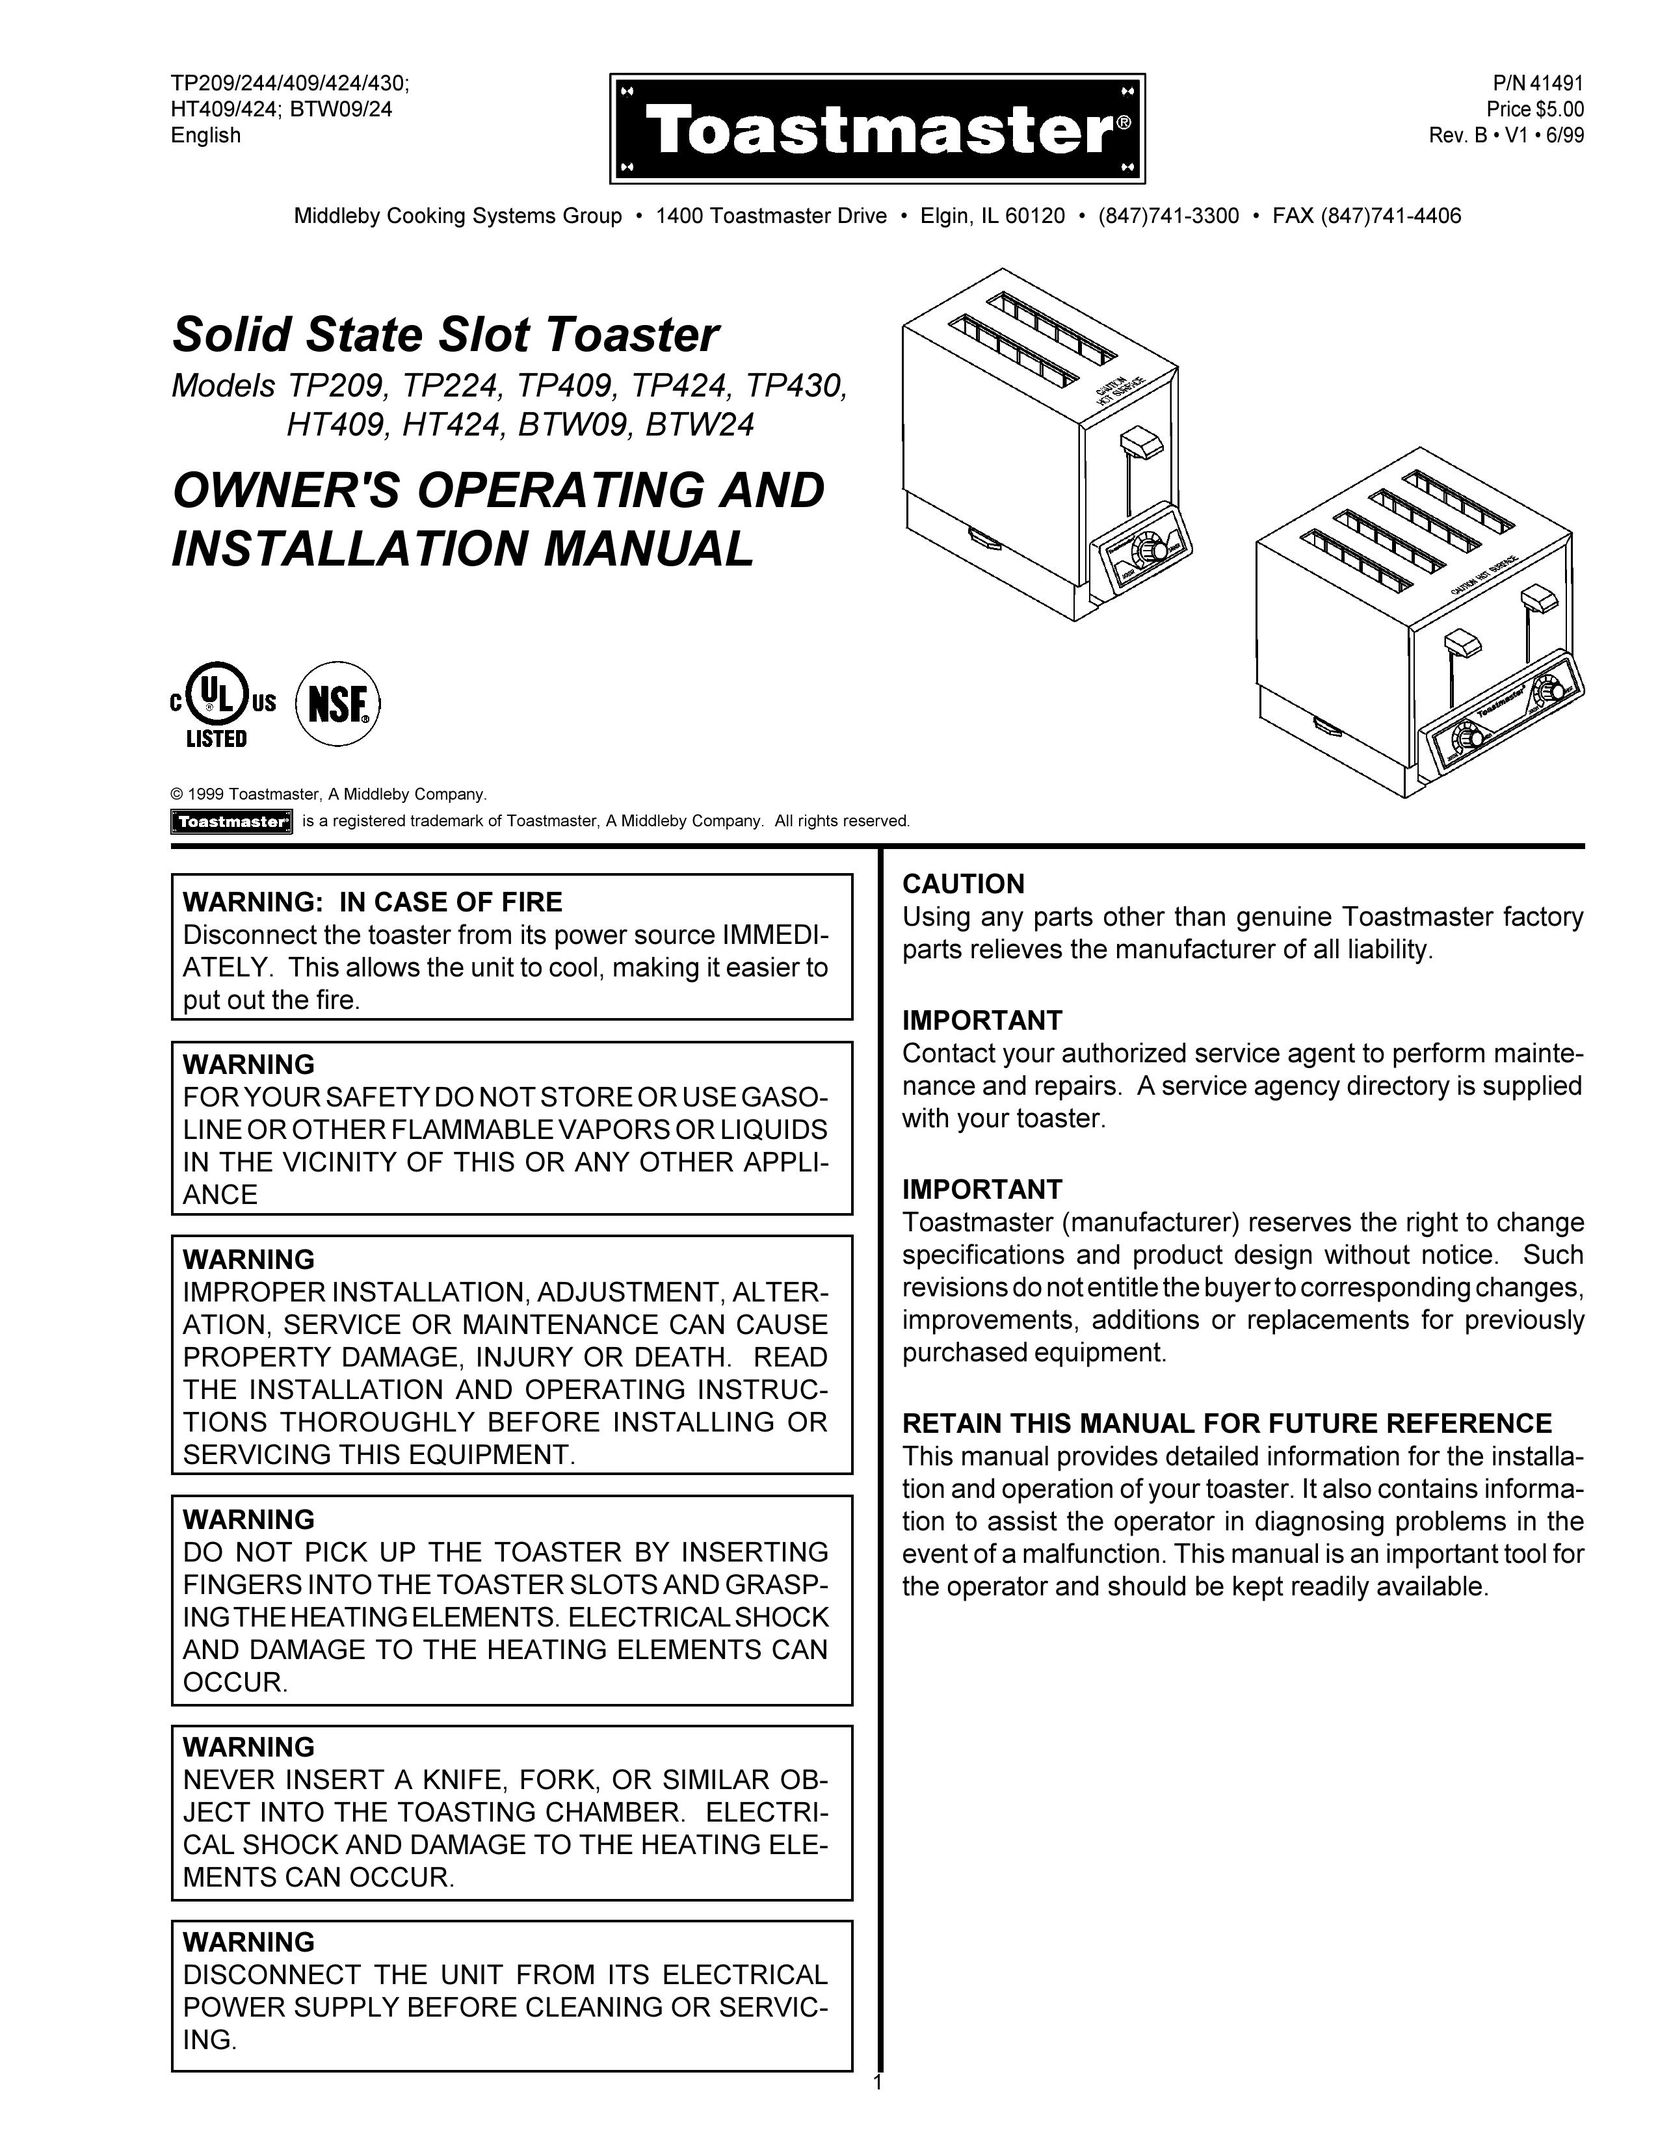 Toastmaster BTW24 Car Stereo System User Manual